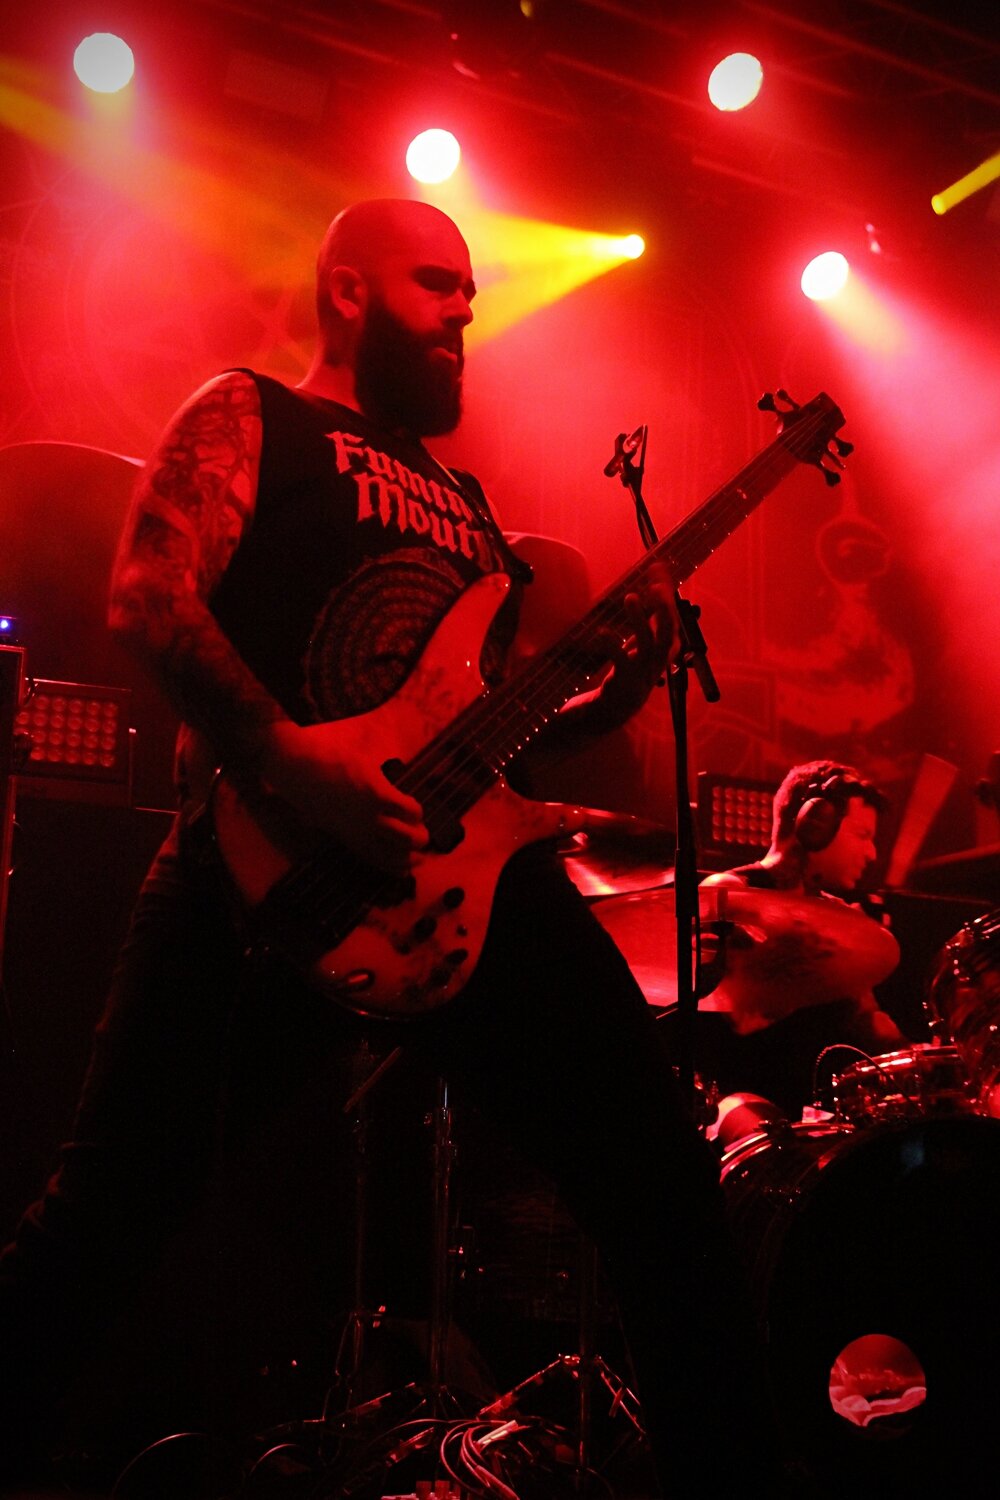 Fit For An Autopsy at the Academy 2 in Manchester on January 26th 2020 ©Gregg Howarth